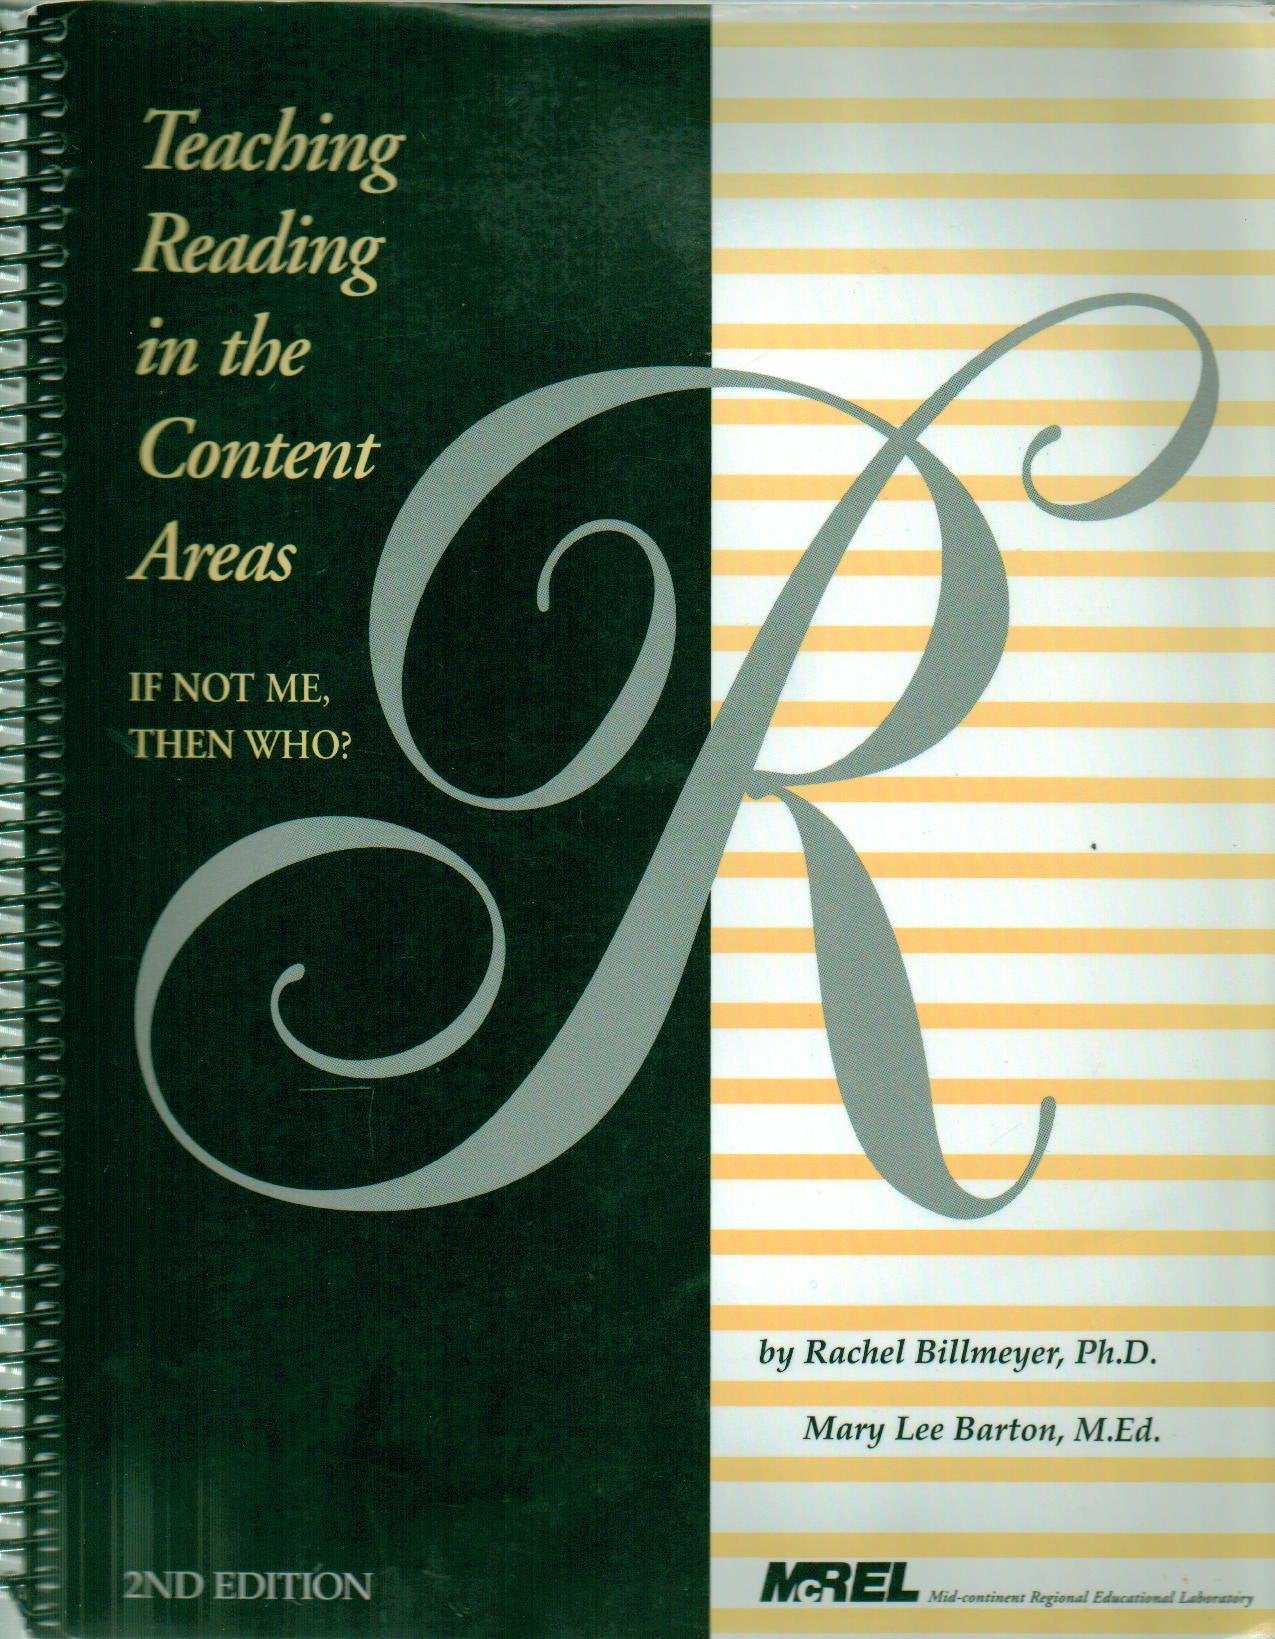 Teaching Reading in the Content Areas: If Not Me, Then Who? 2nd Edition